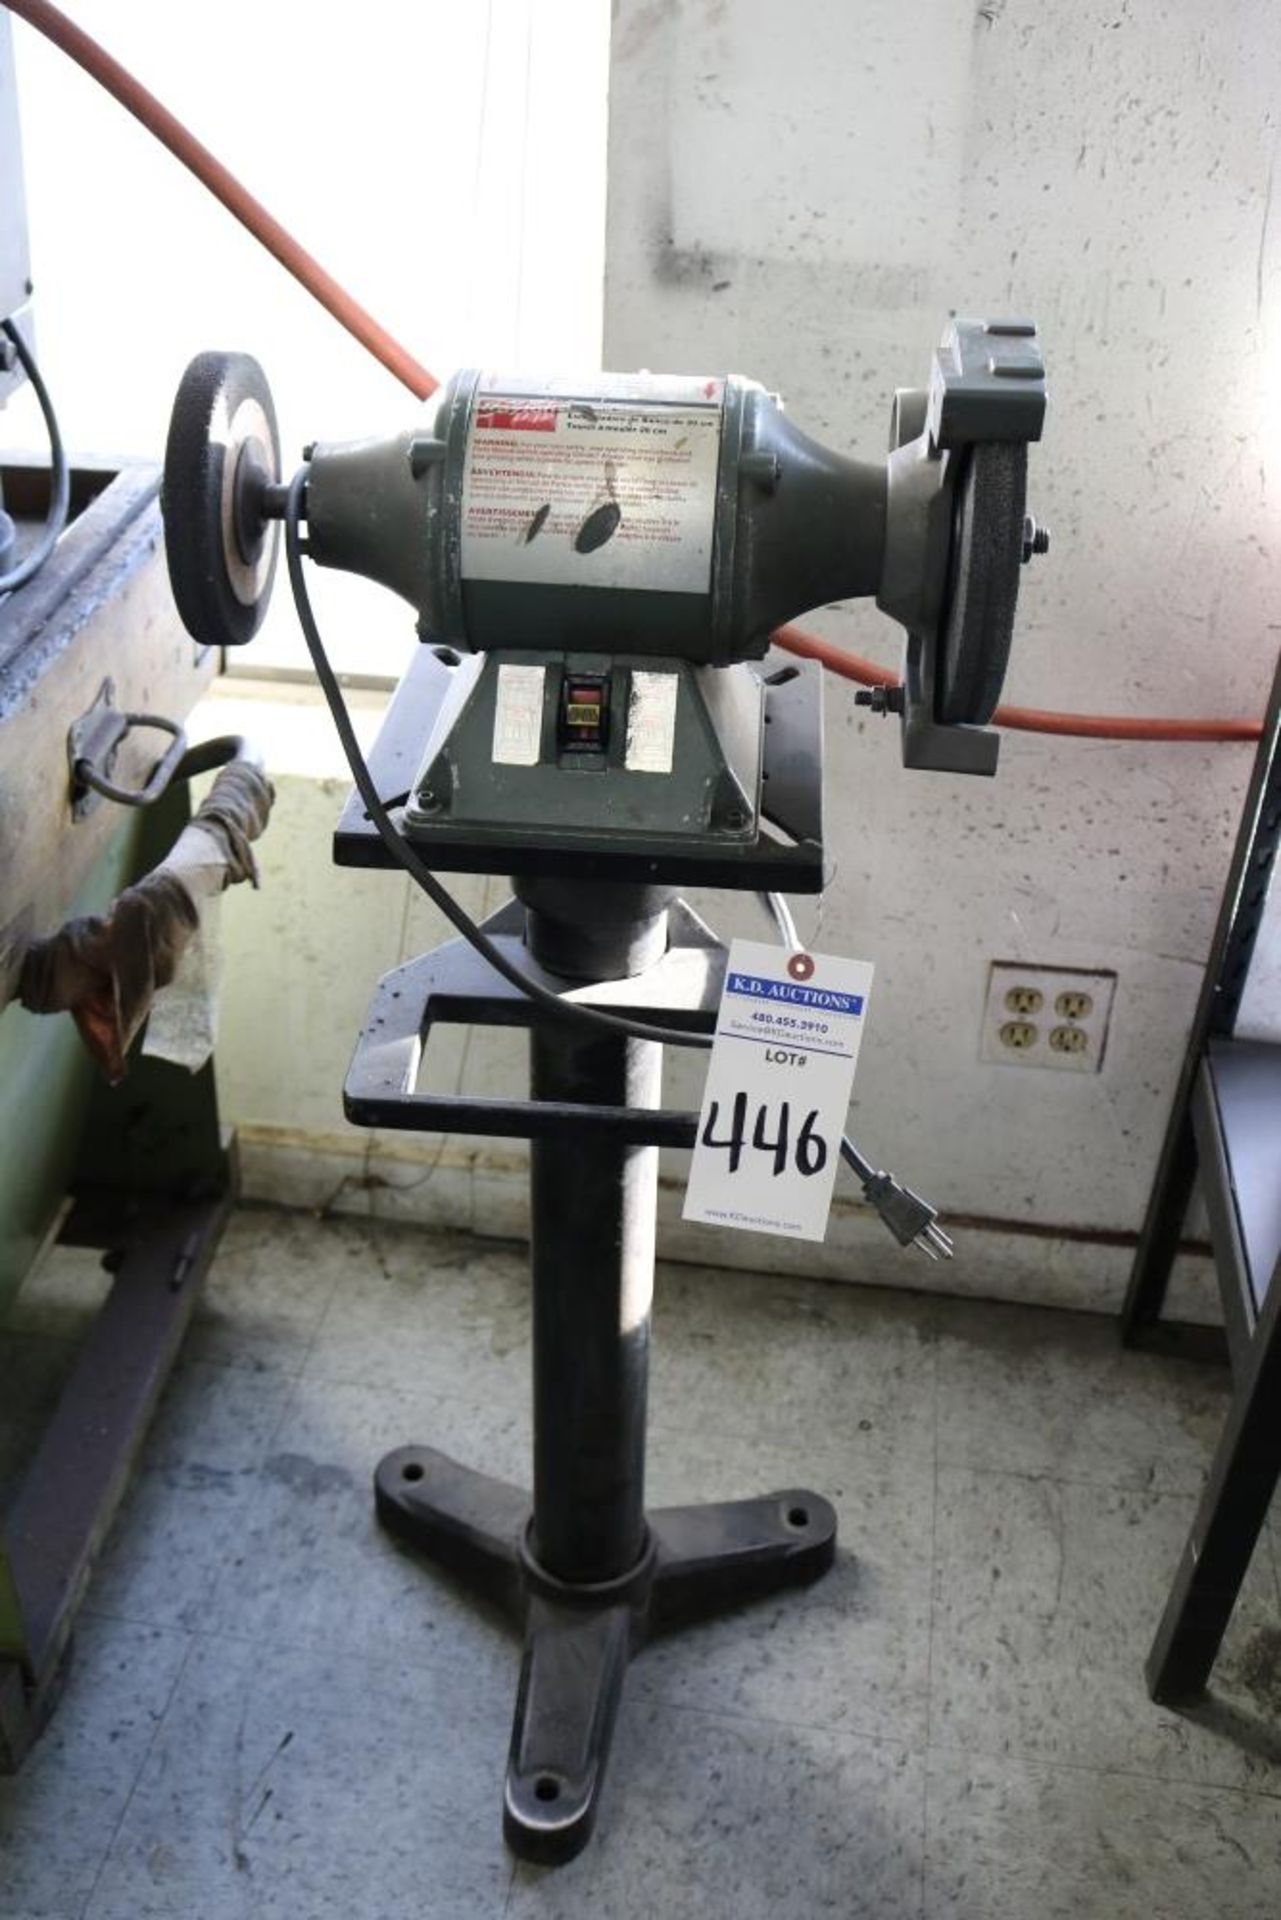 Dayton 8" Bench Grinder on Stand 3/4 HP, 3450 RPM - Image 5 of 5